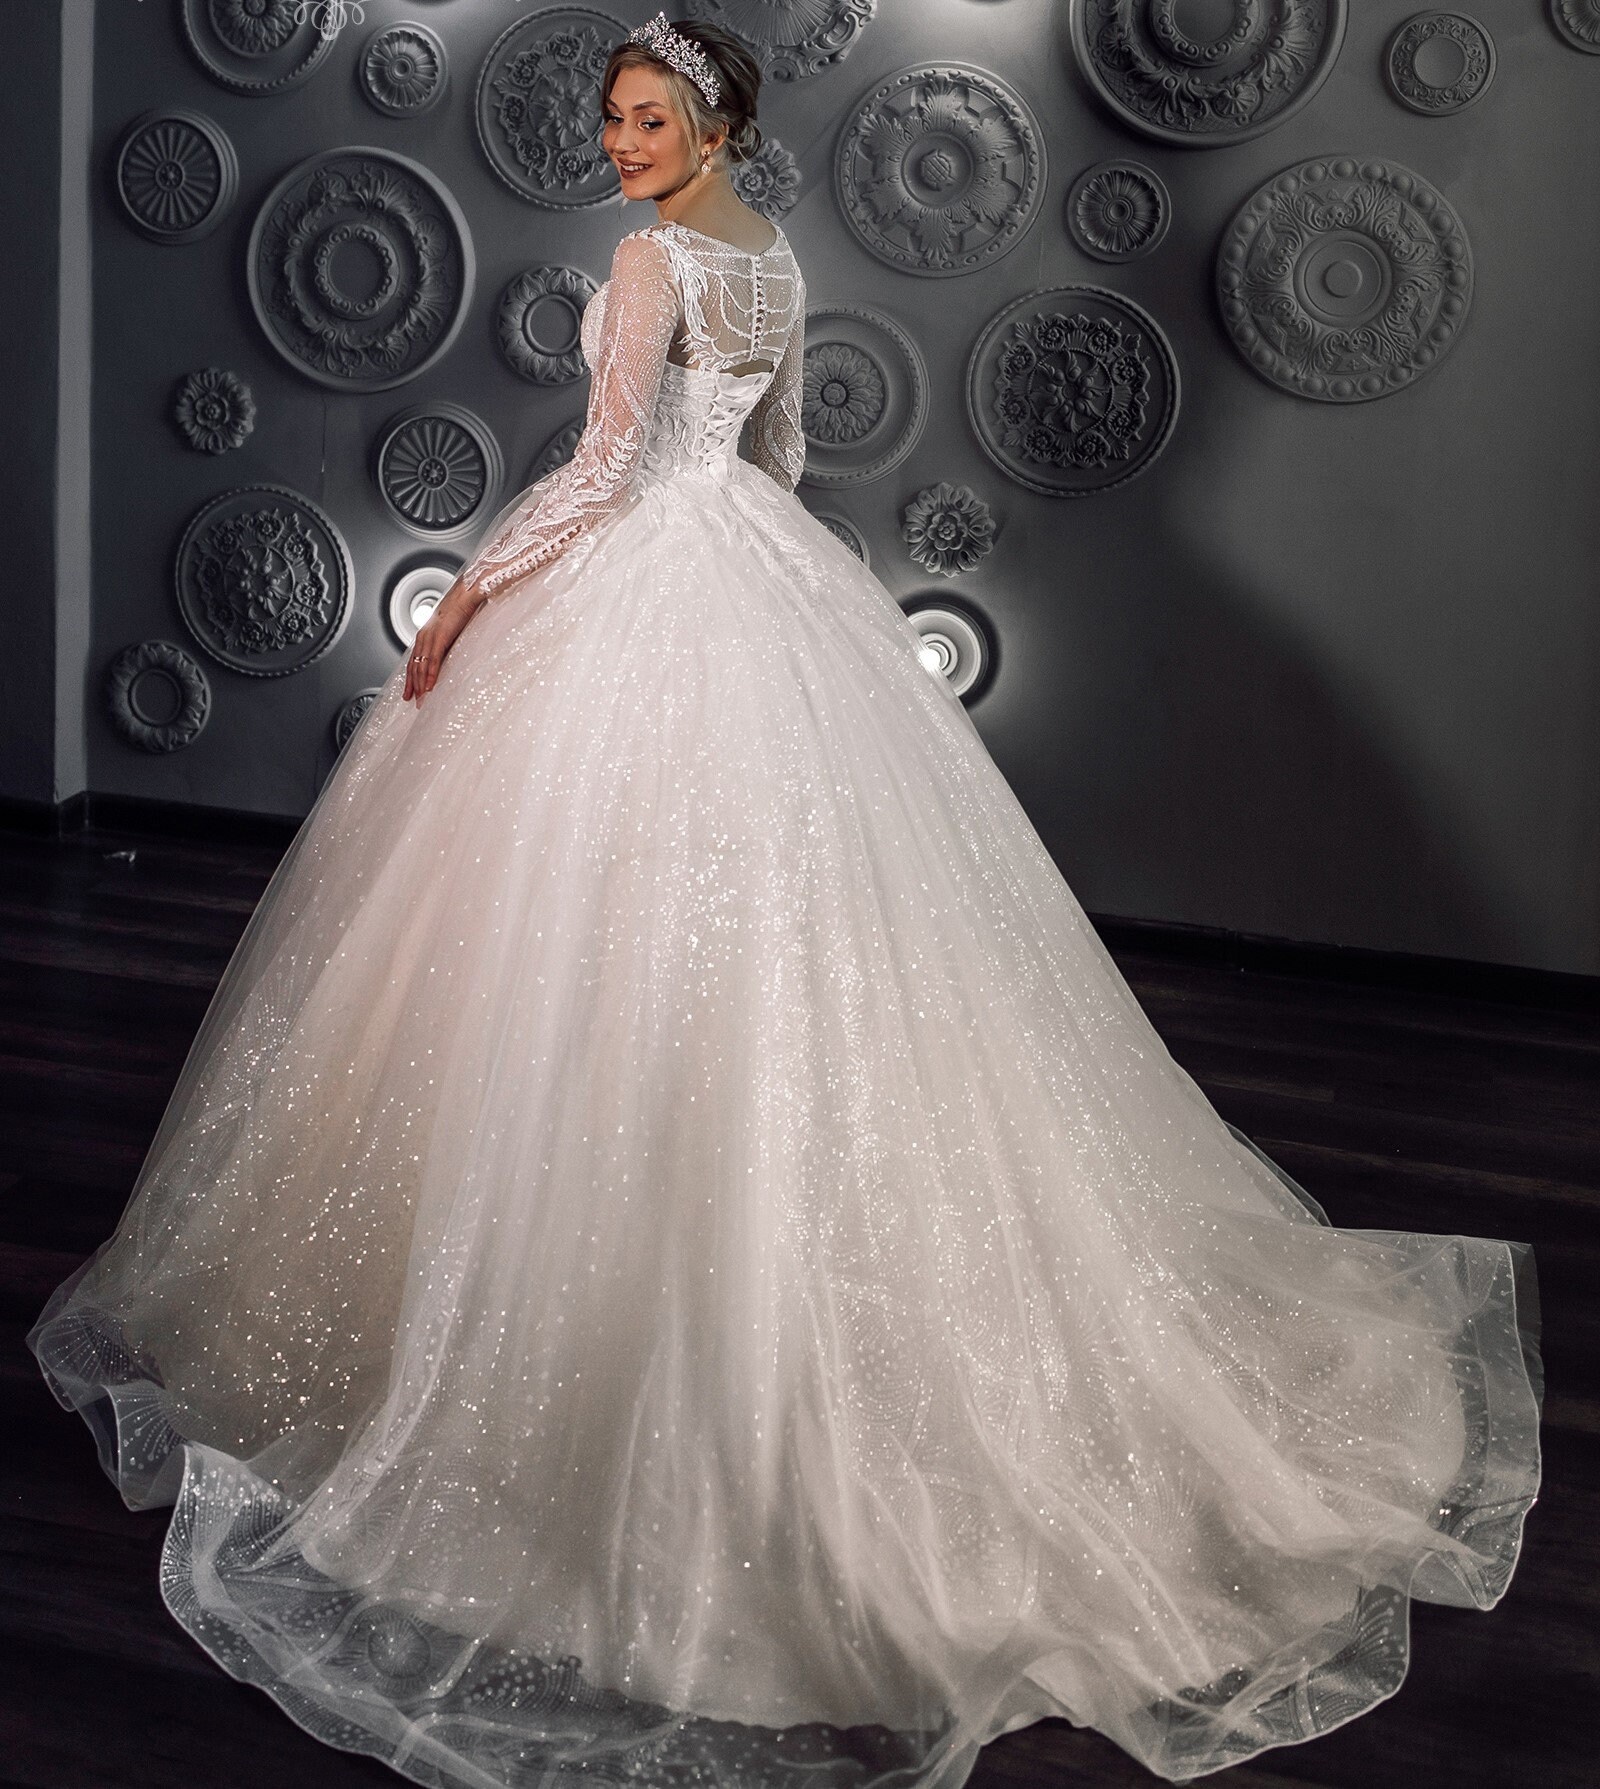 Ball Gown Wedding Dress With Long Sleeves, Amazing Design, Gorgeous ...